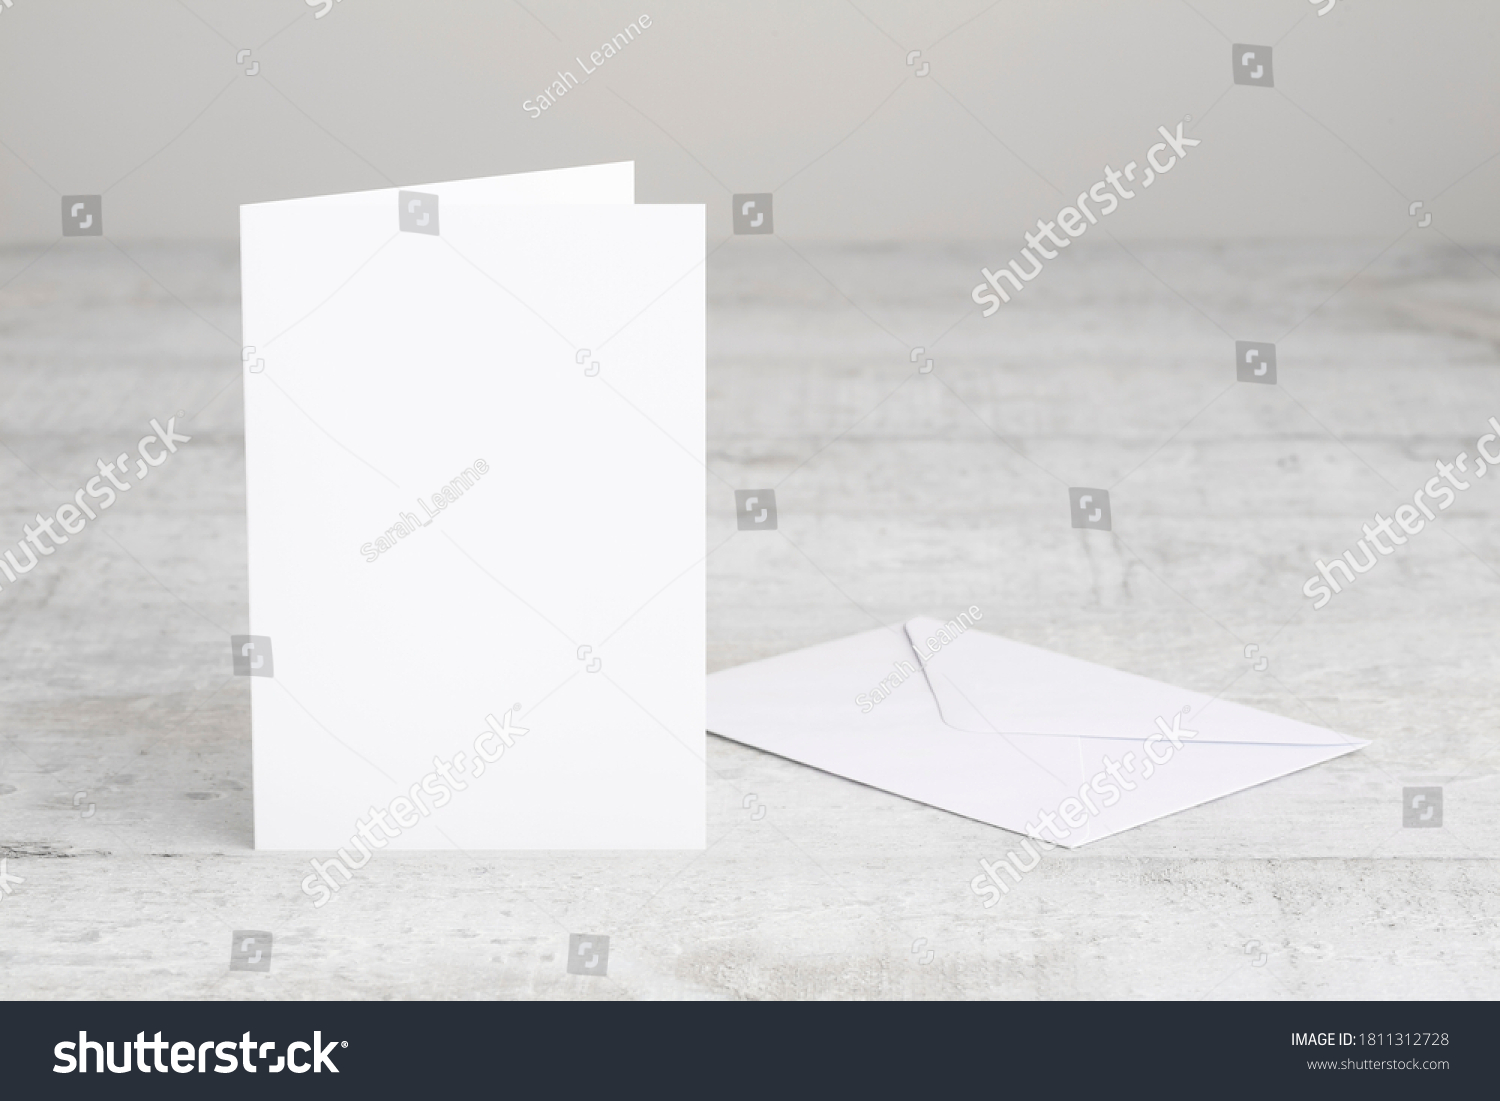 One white greeting card mockup with envelope, standing upright on a white wooden desk. Blank, closed card template.  #1811312728